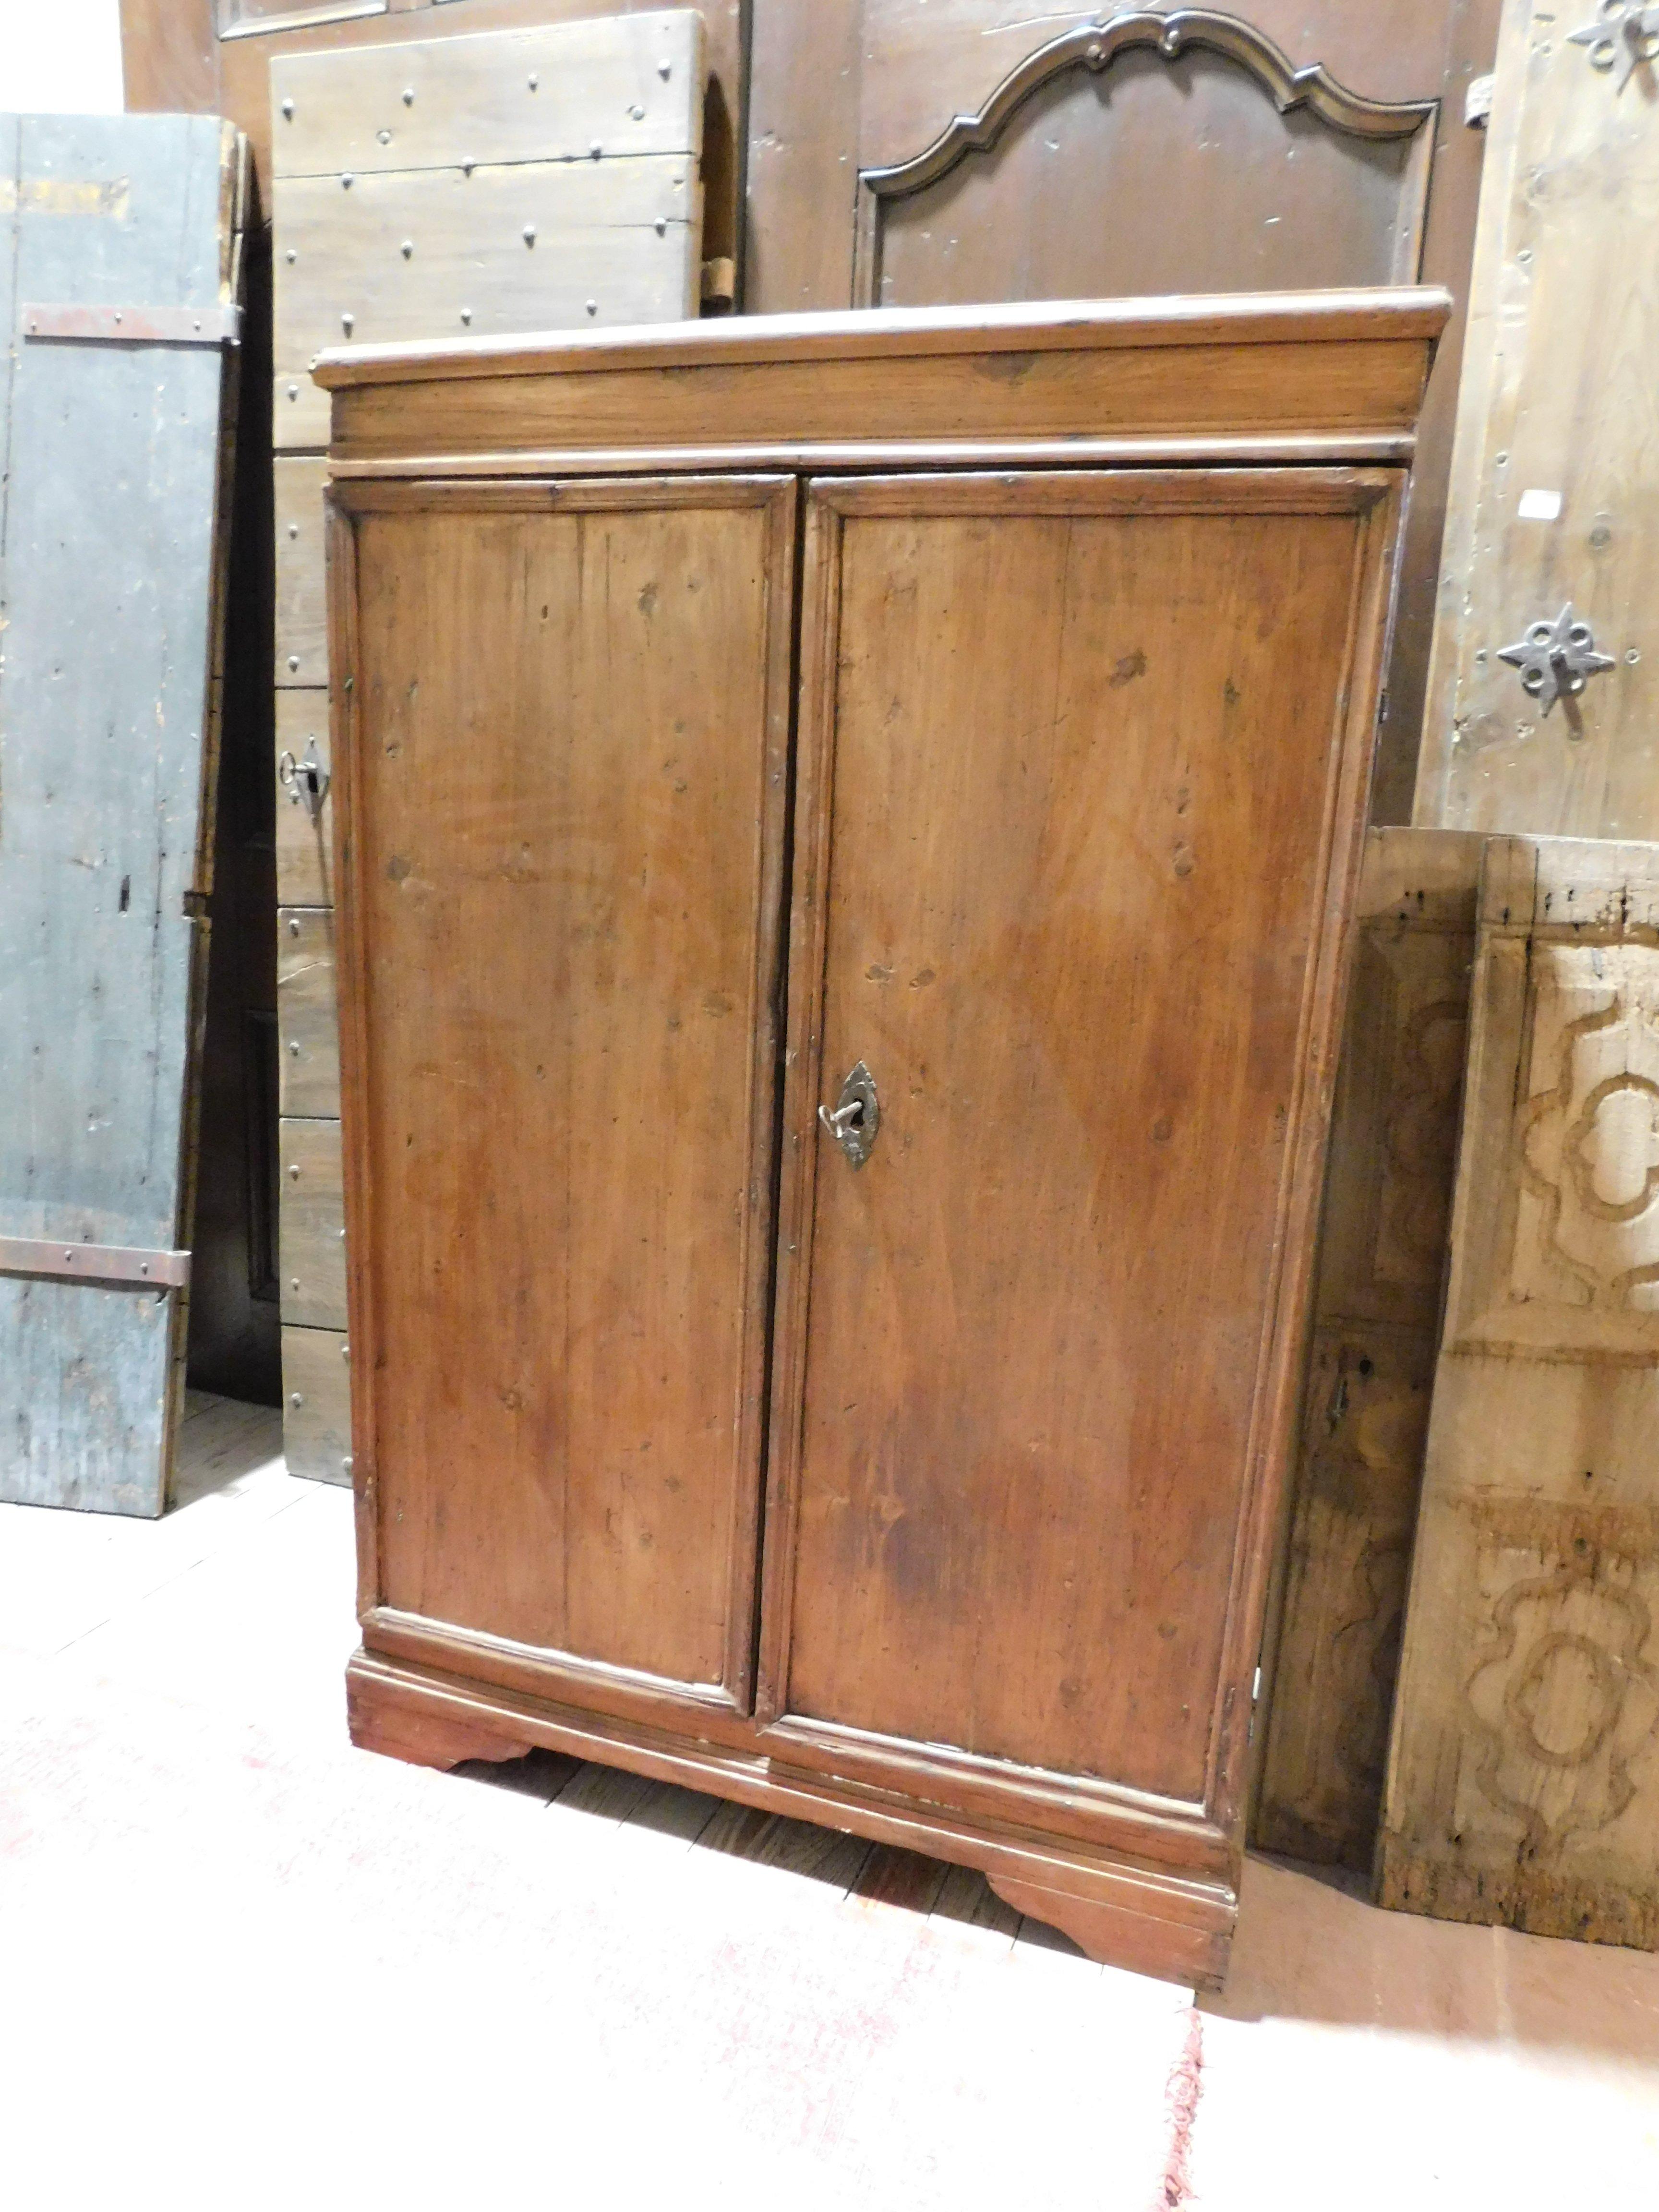 Hand-Carved Cabinet in Poplar, 2 Capacious Doors, 18th Century Italy